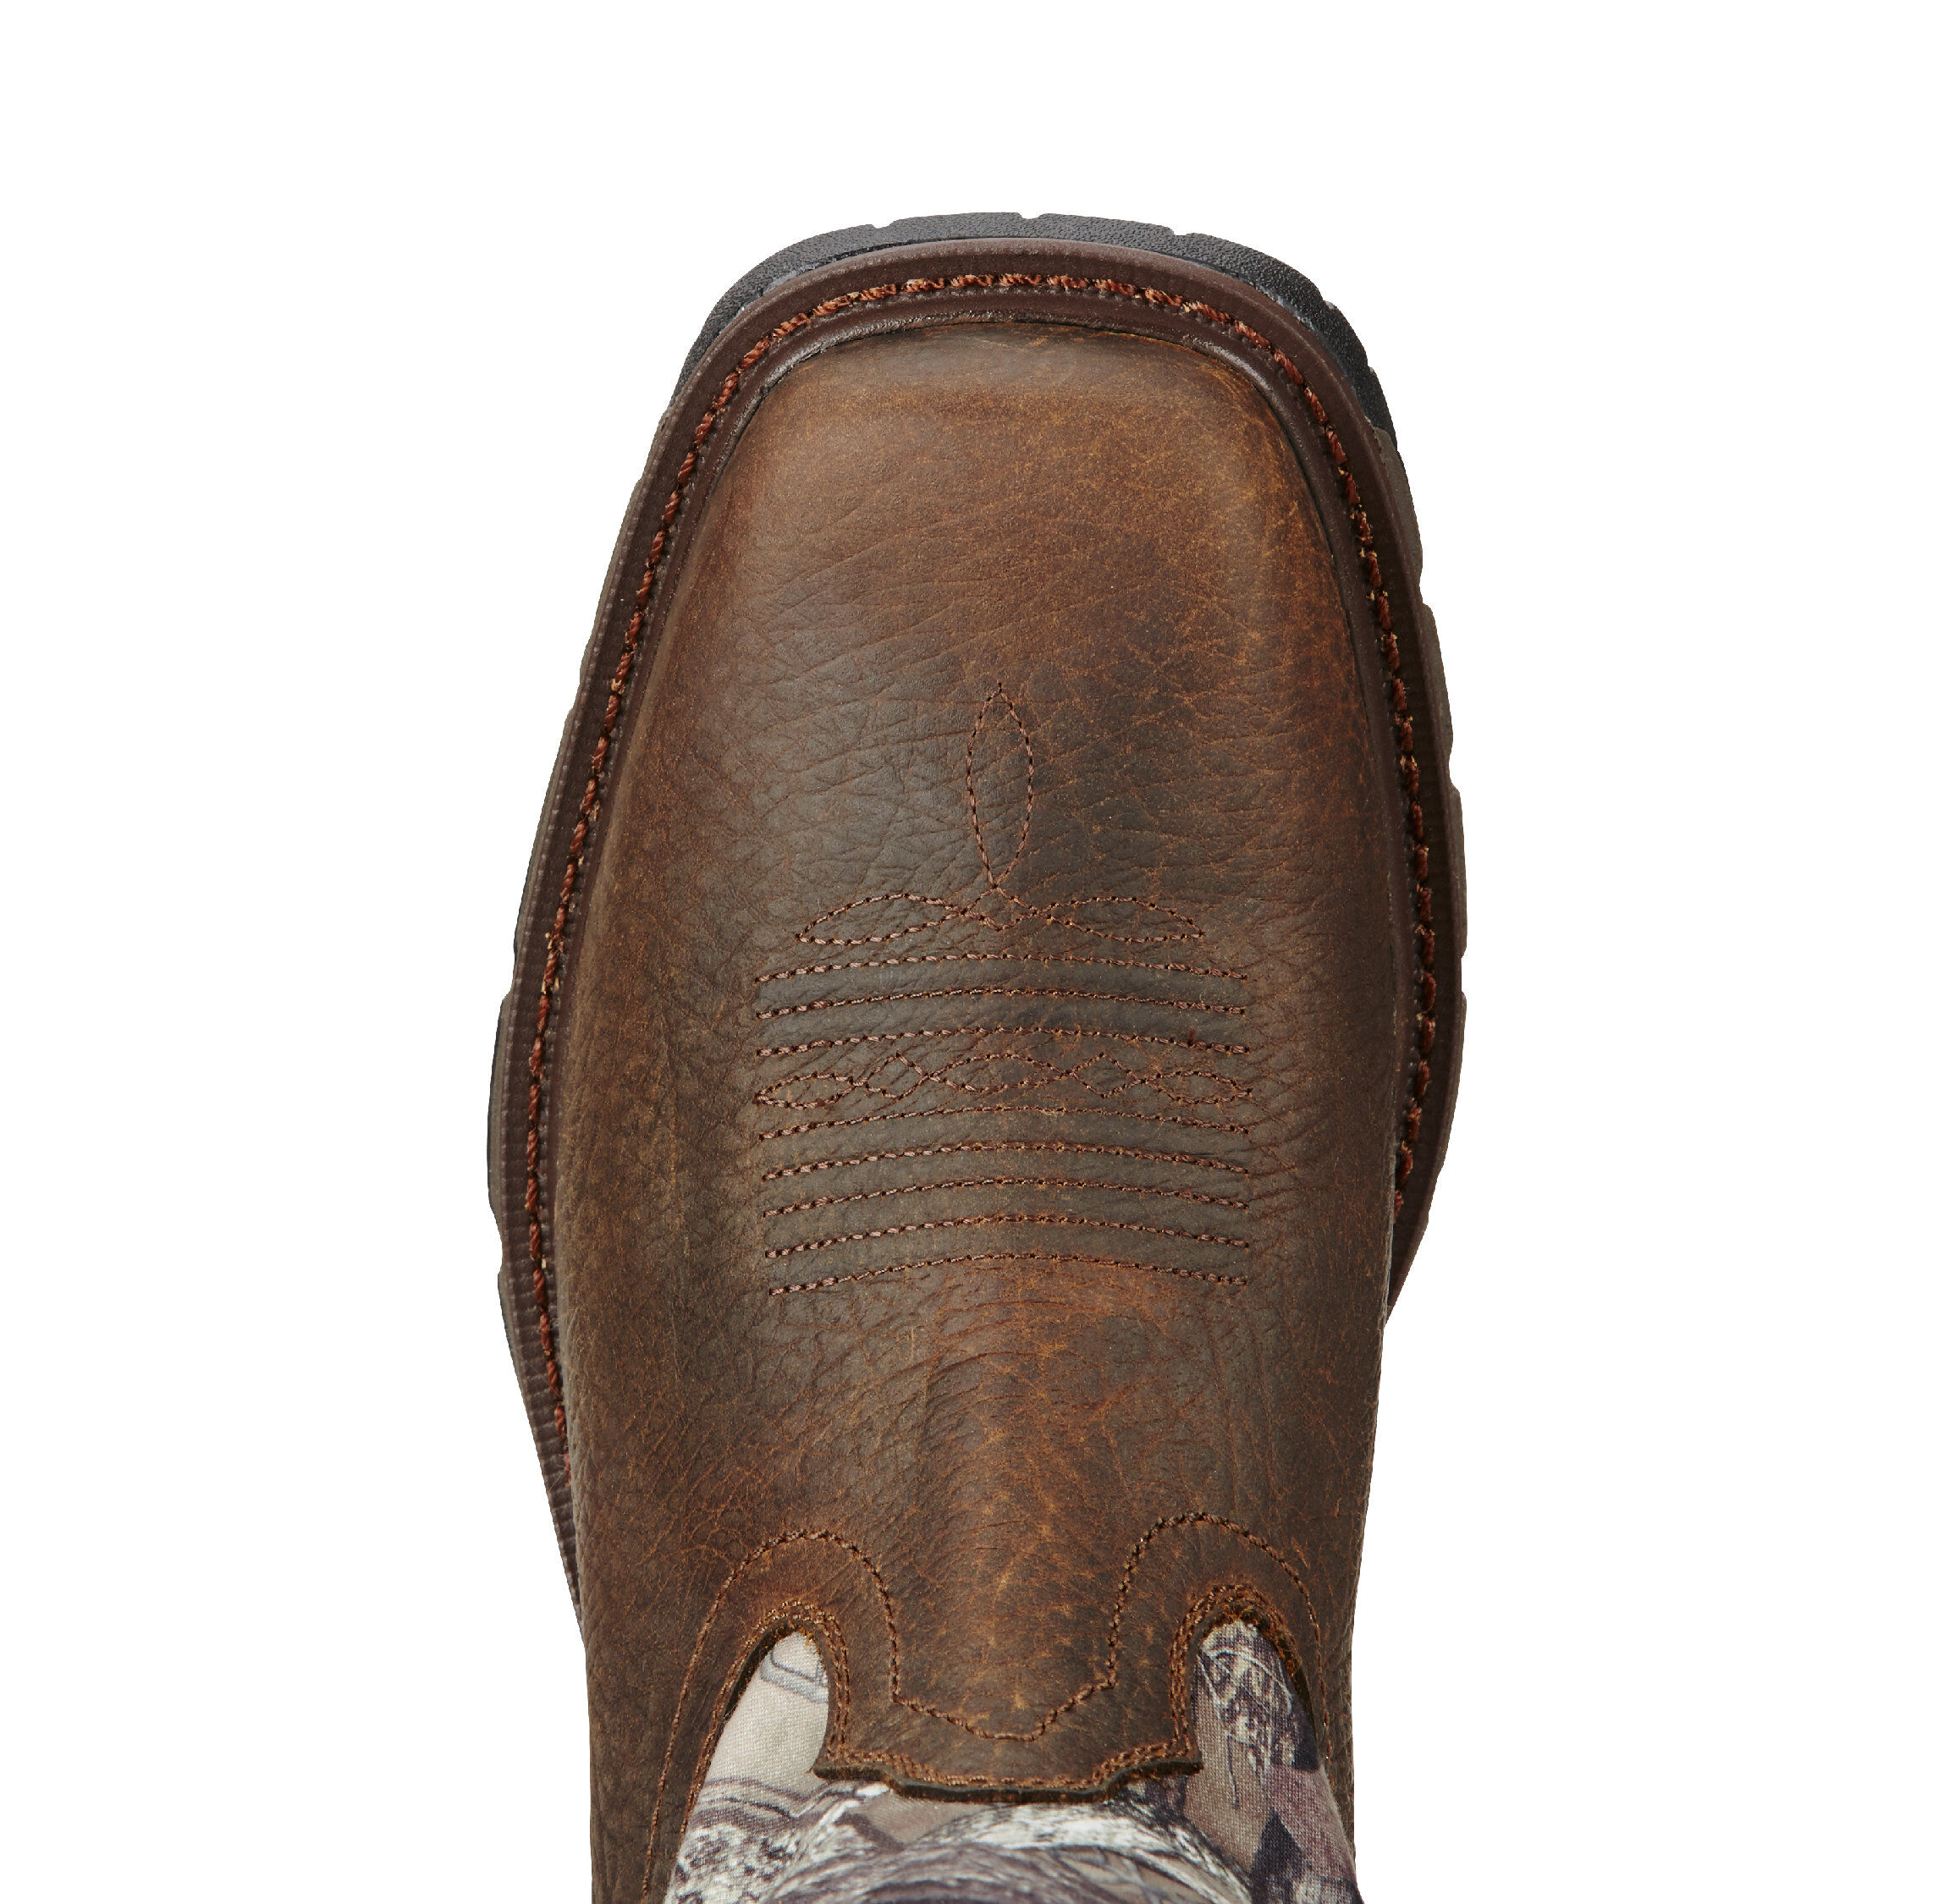 ariat conquest h2o waterproof hunting boots